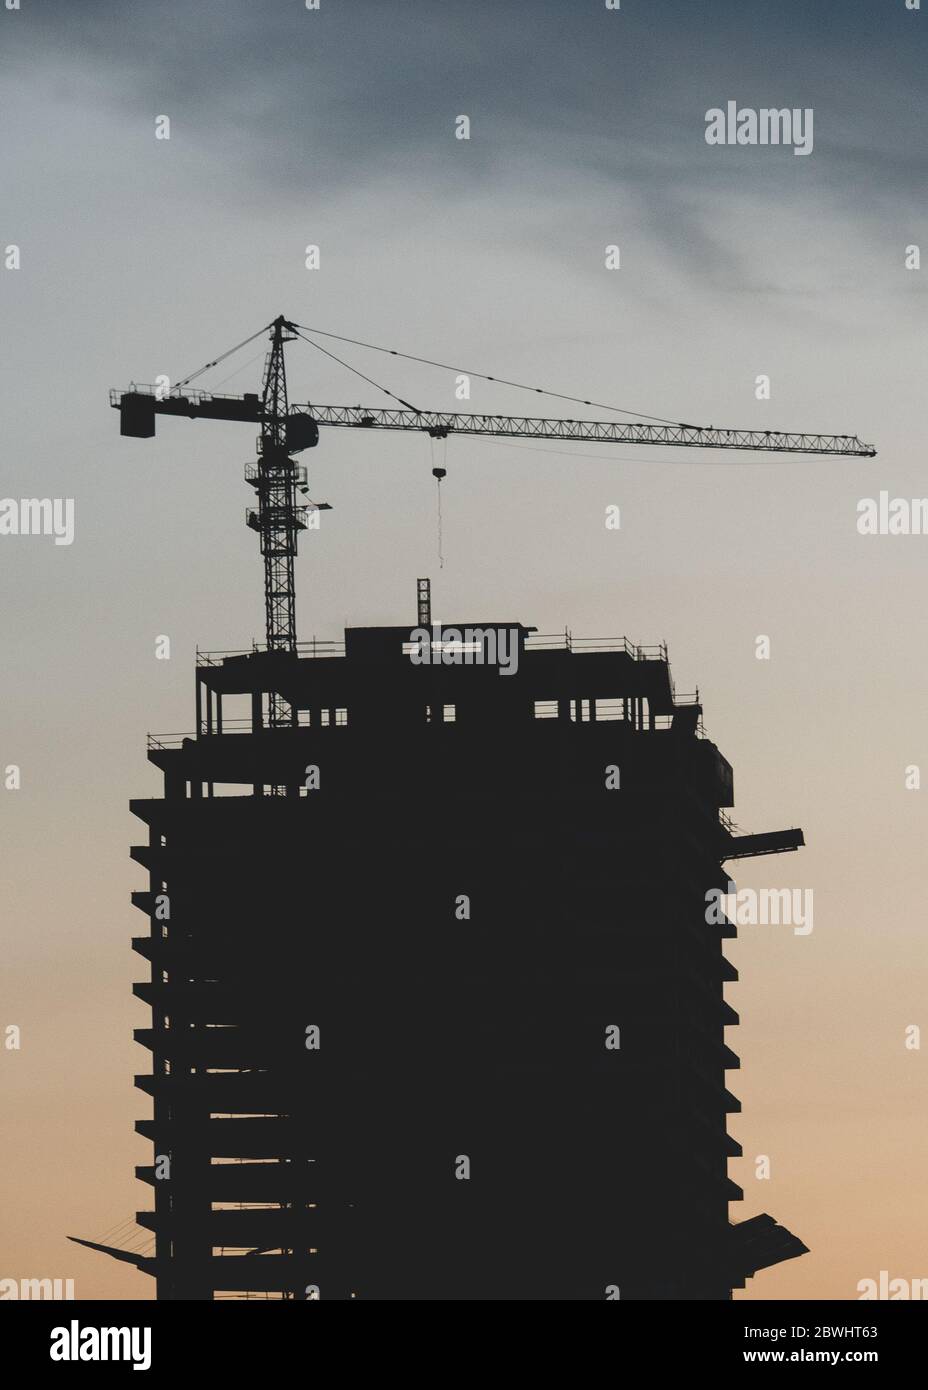 Silhouette of tower crane constructing high building in city. Stock Photo